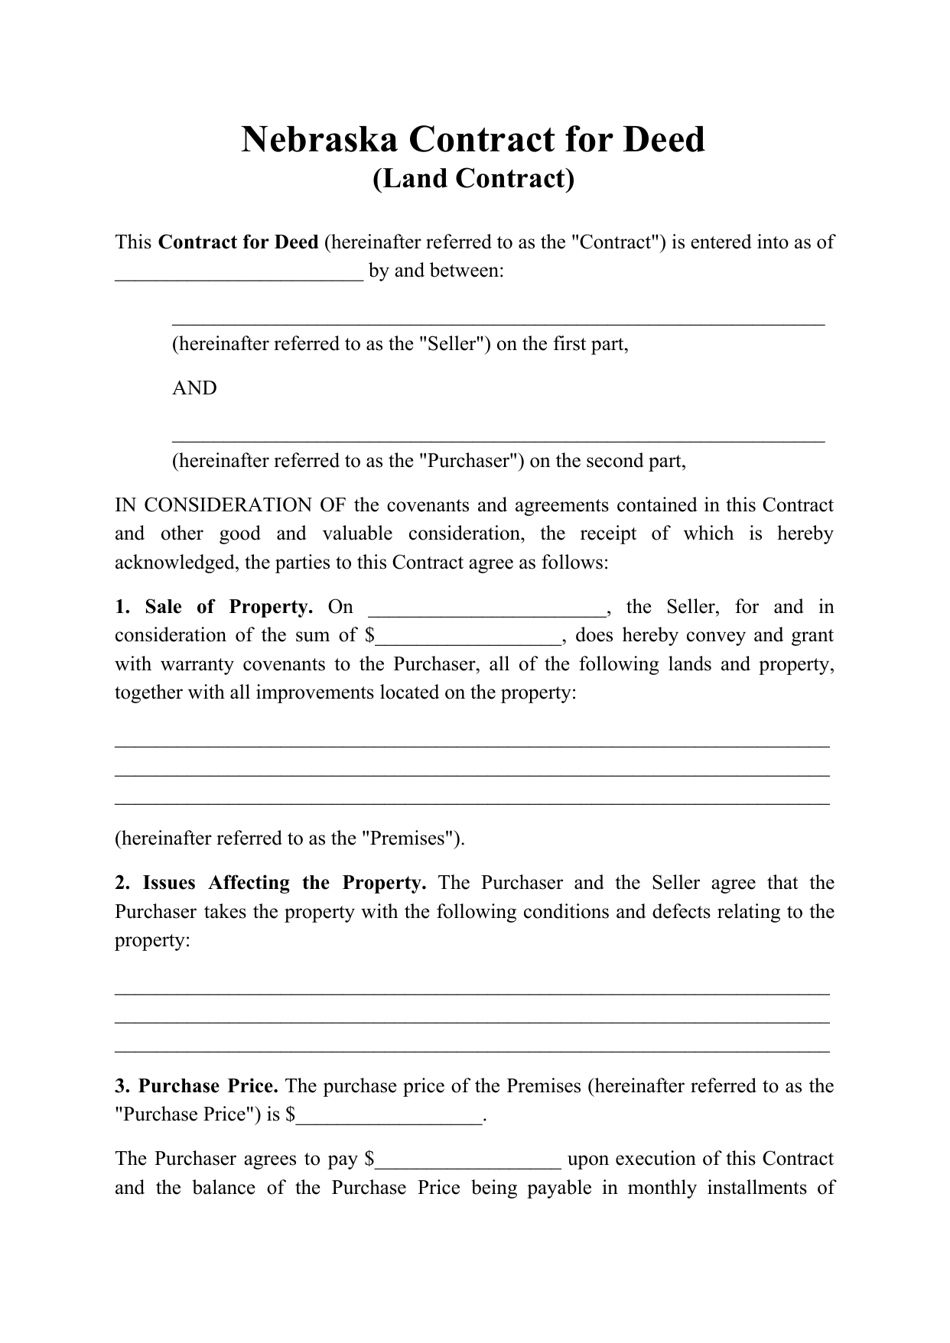 Contract for Deed (Land Contract) - Nebraska, Page 1